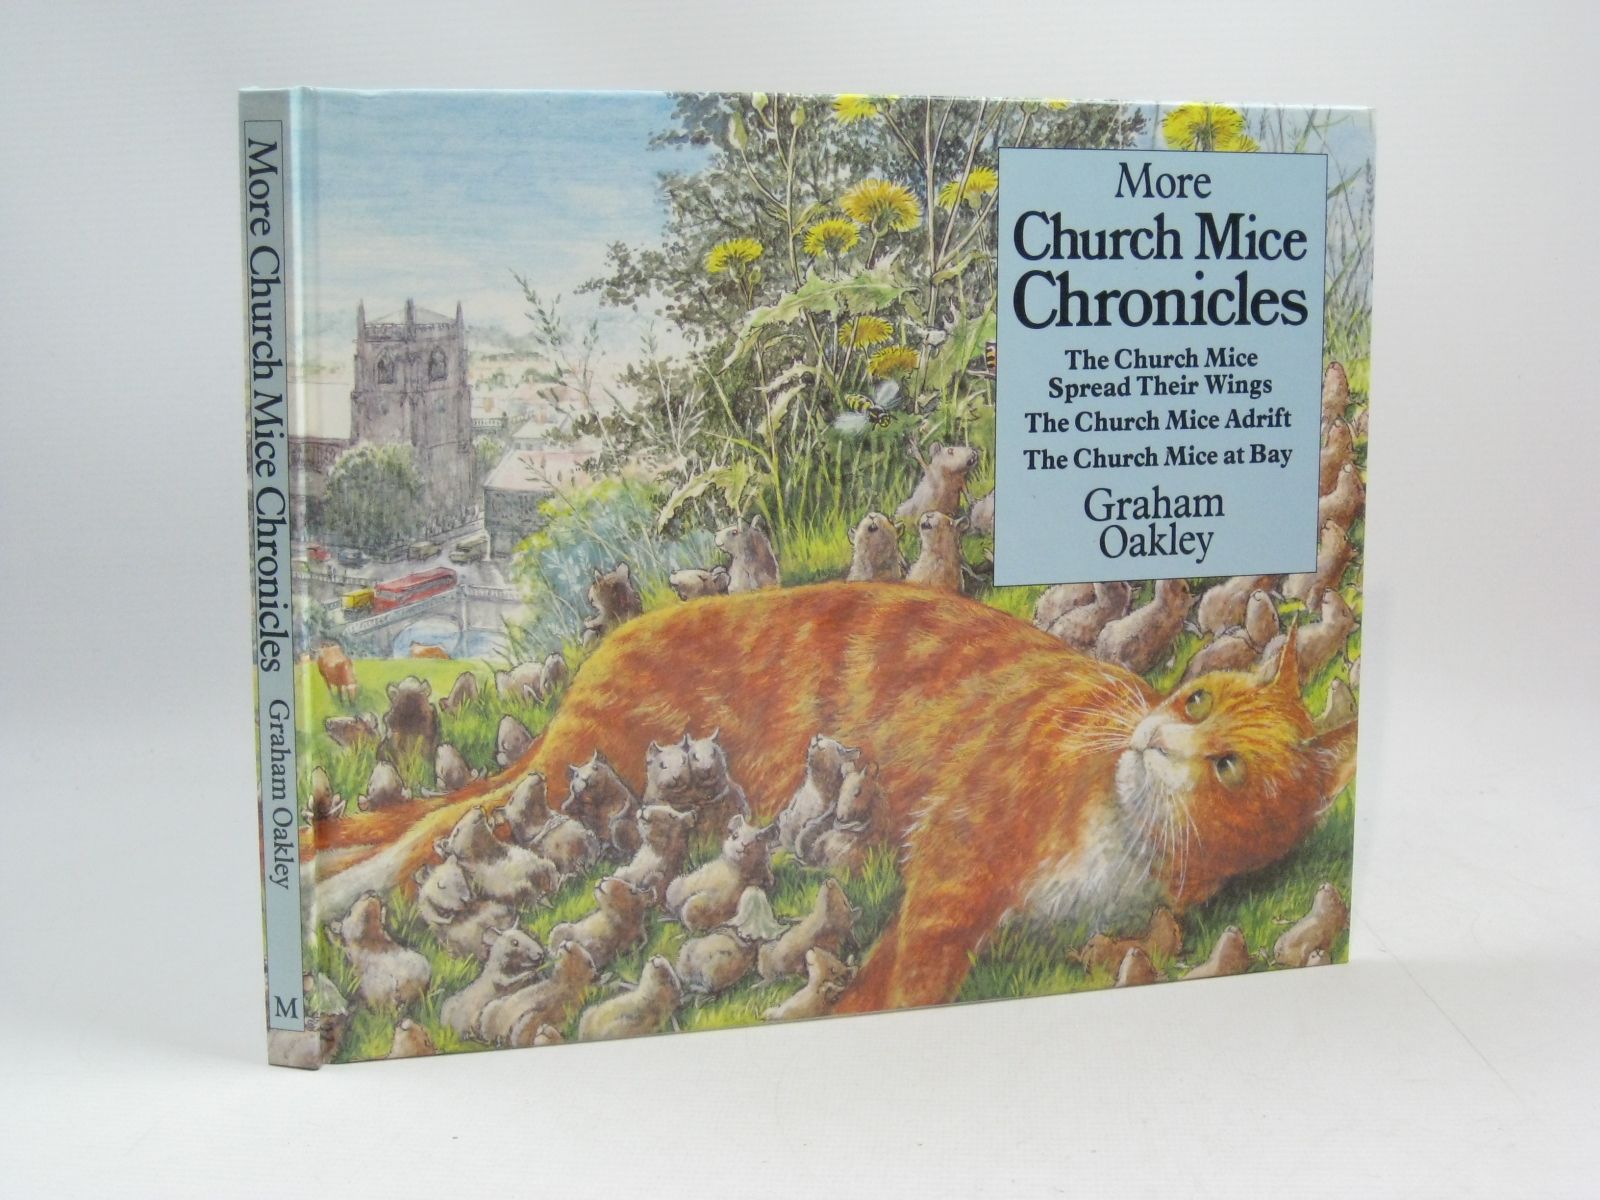 Stella & Rose's Books : MORE CHURCH MICE CHRONICLES Written By Graham Oakley,  STOCK CODE: 1504530